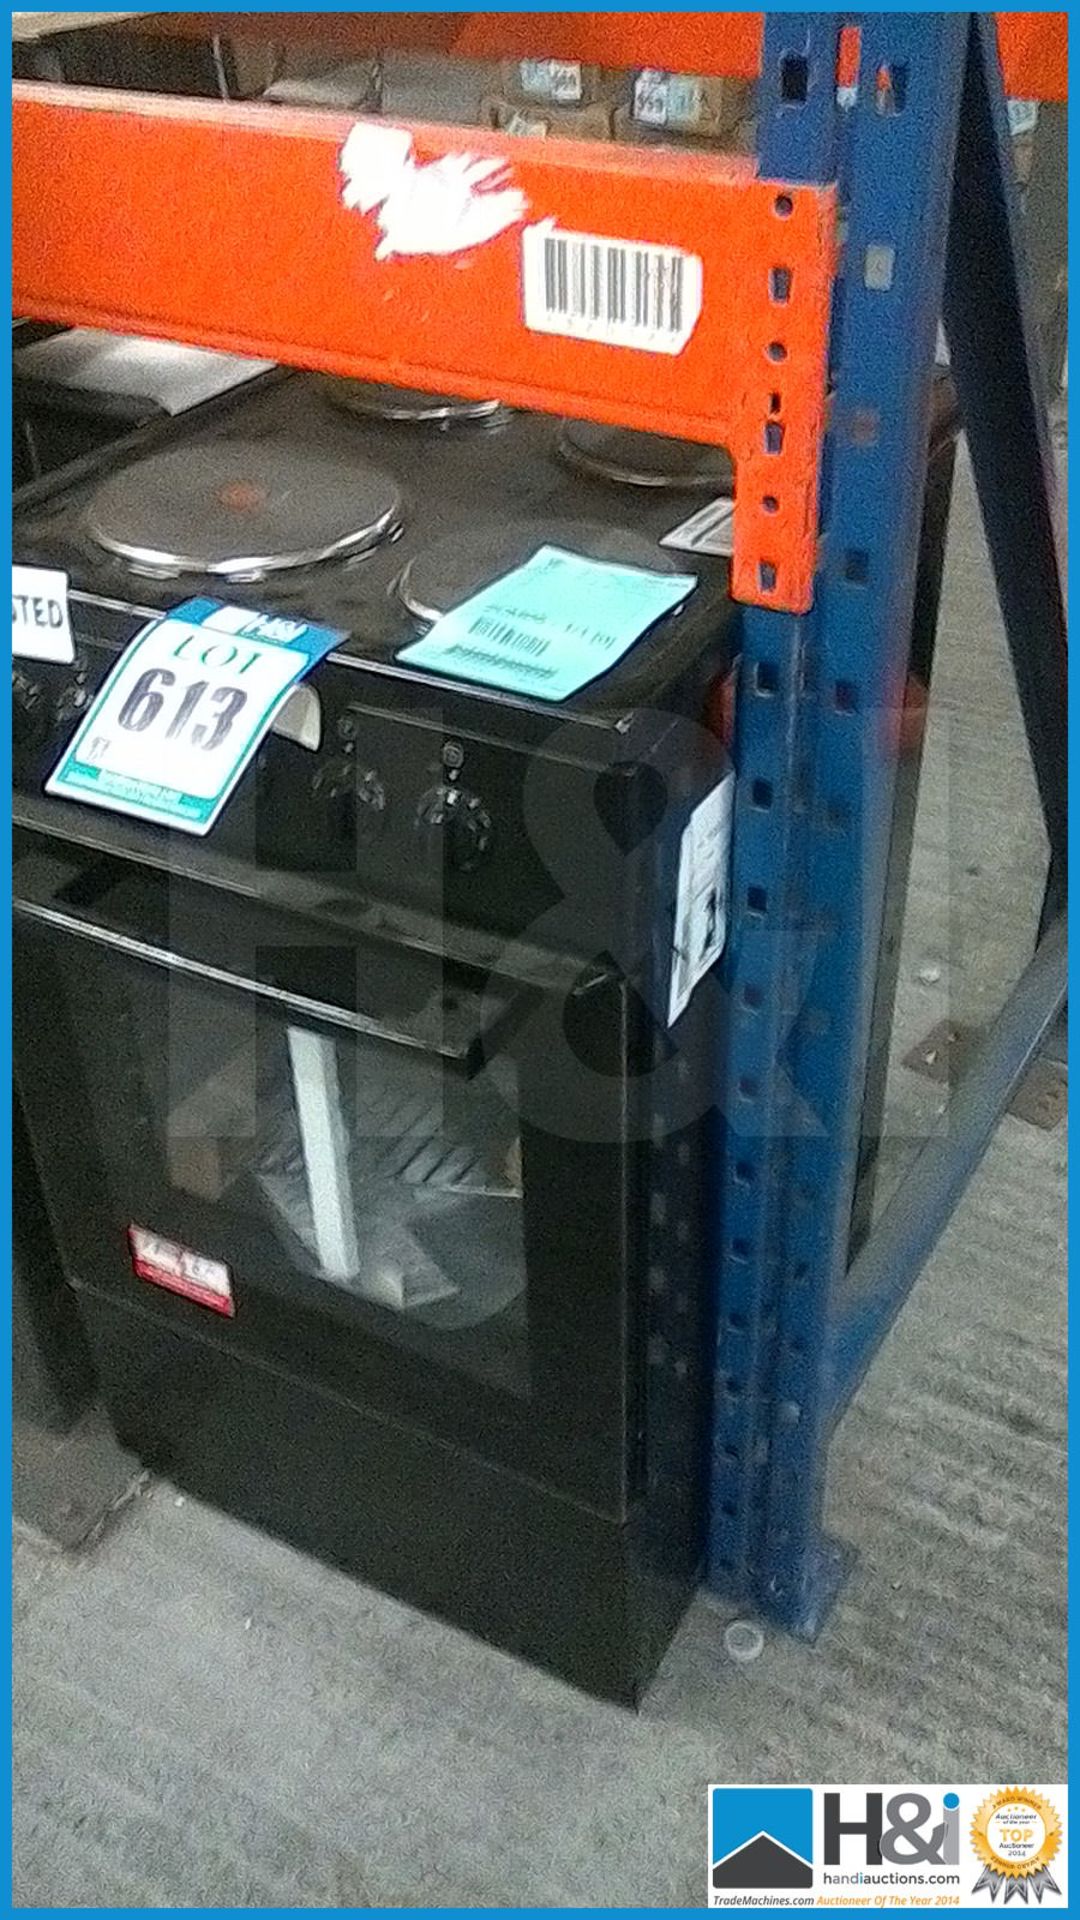 EX-DISPLAY UNTESTED SWAN SX1011B ELECTRIC OVEN [BLACK] 90 x 50 x 60cm RRP GBP 251 - Image 3 of 3